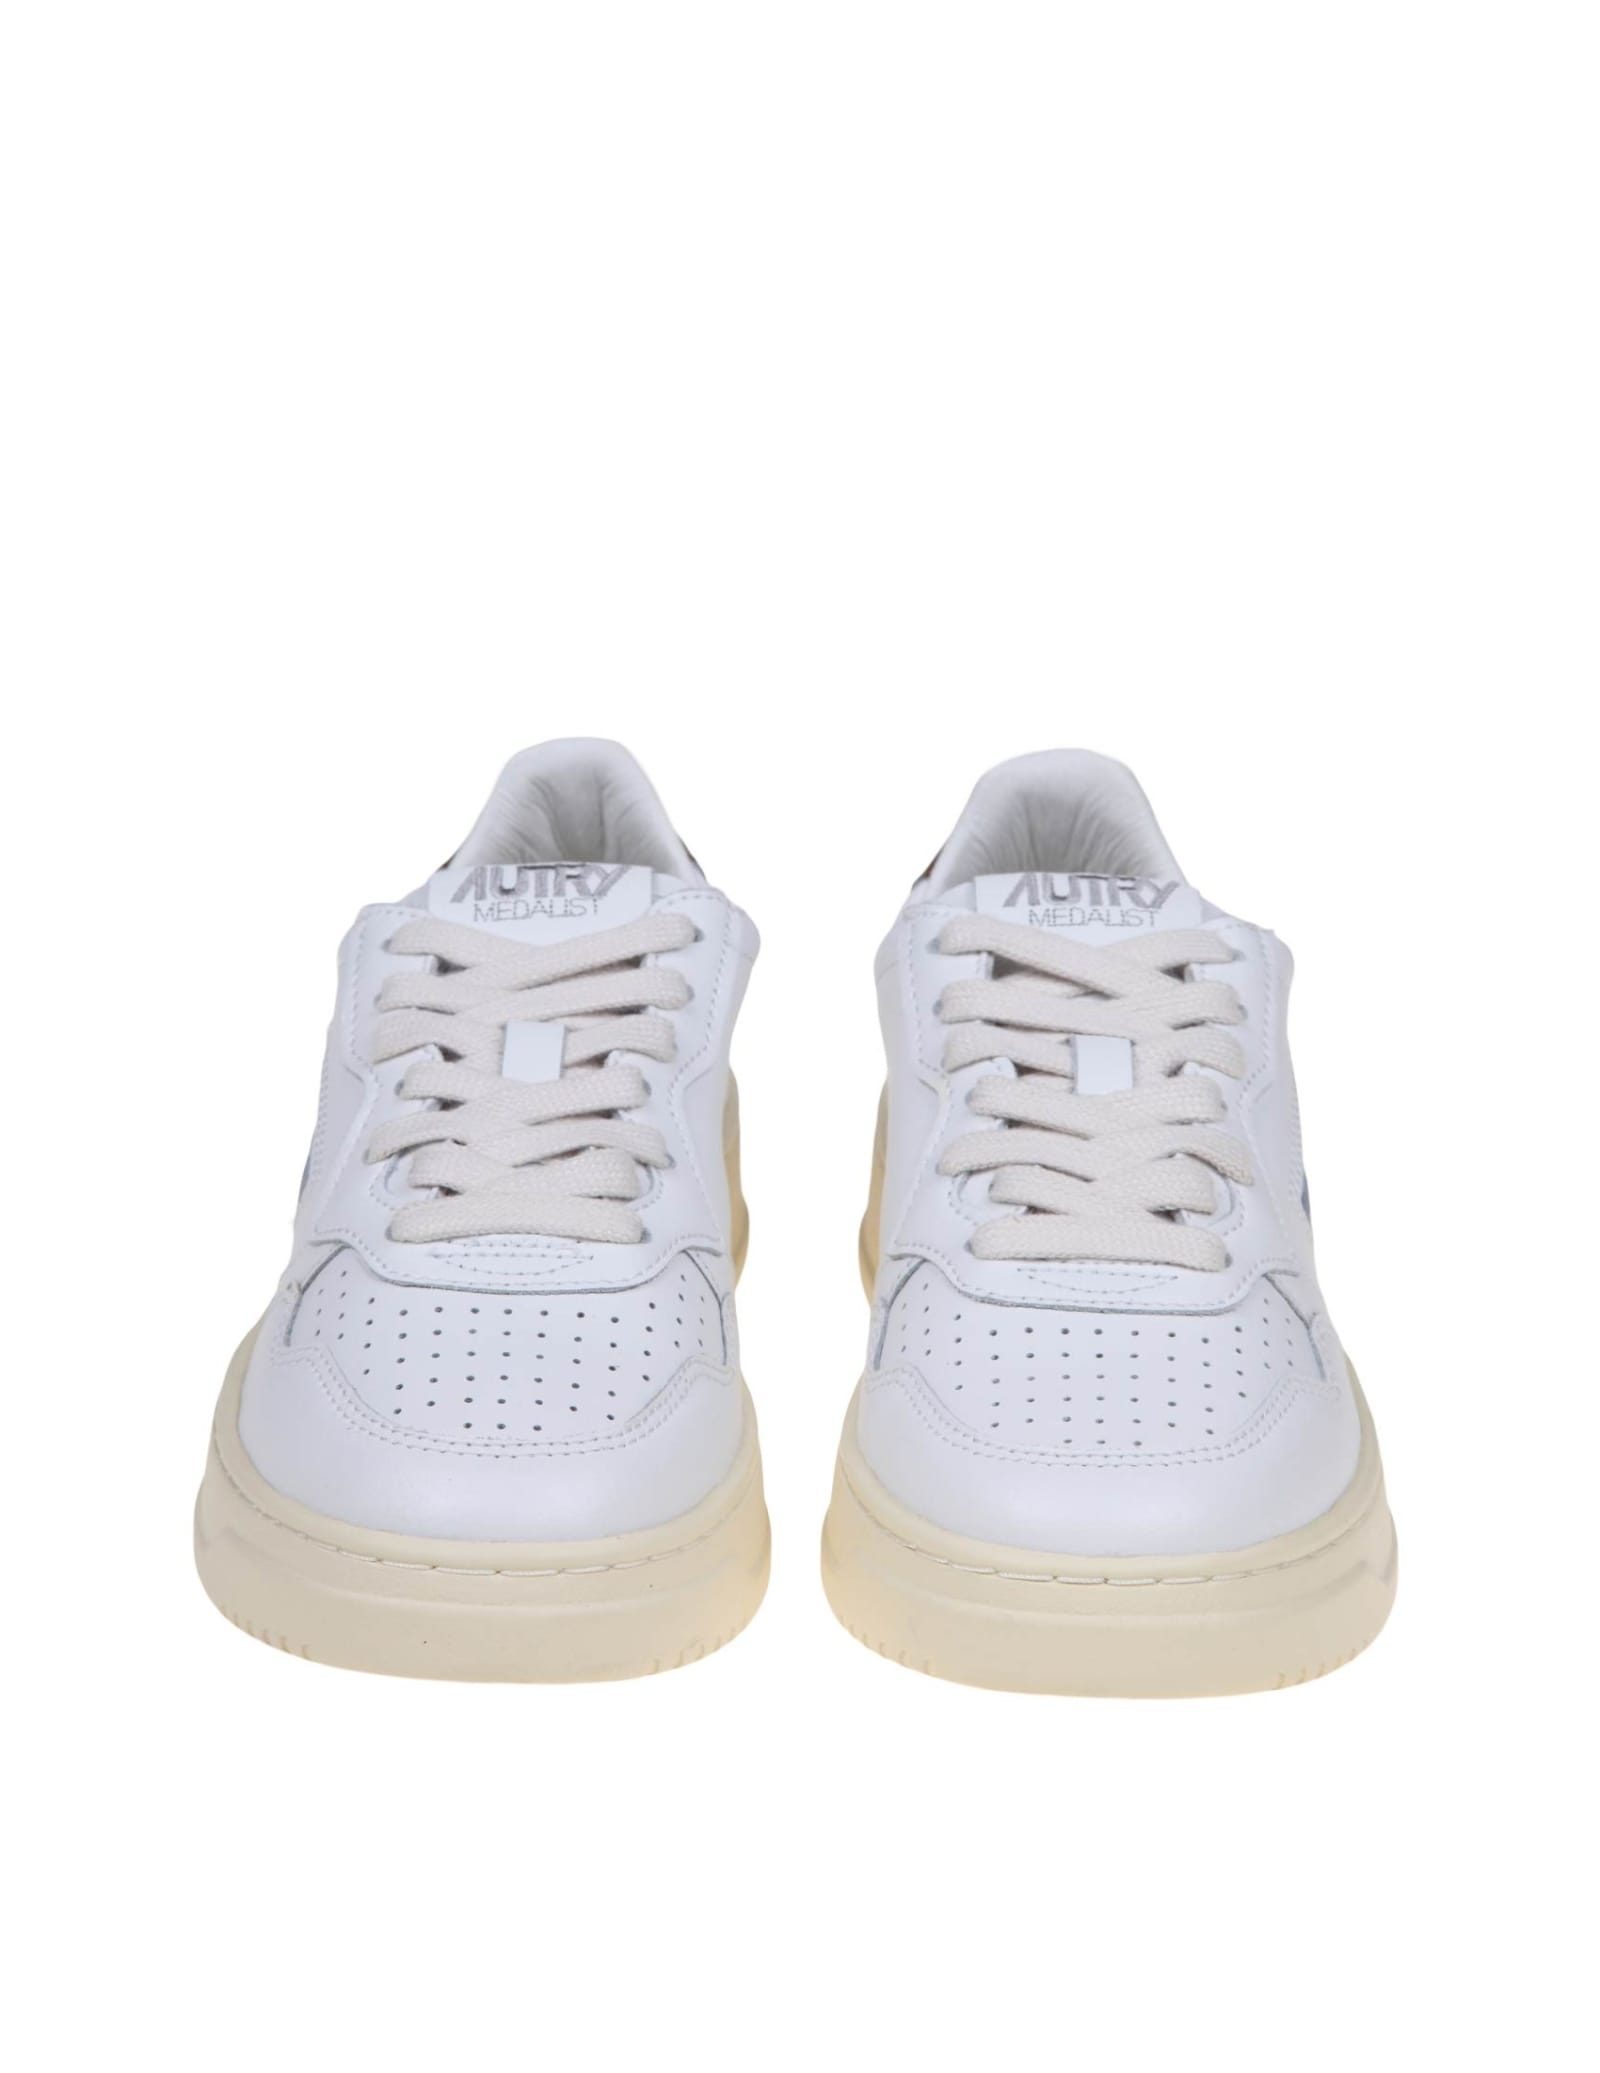 Shop Autry Sneakers In White And Bronze Leather